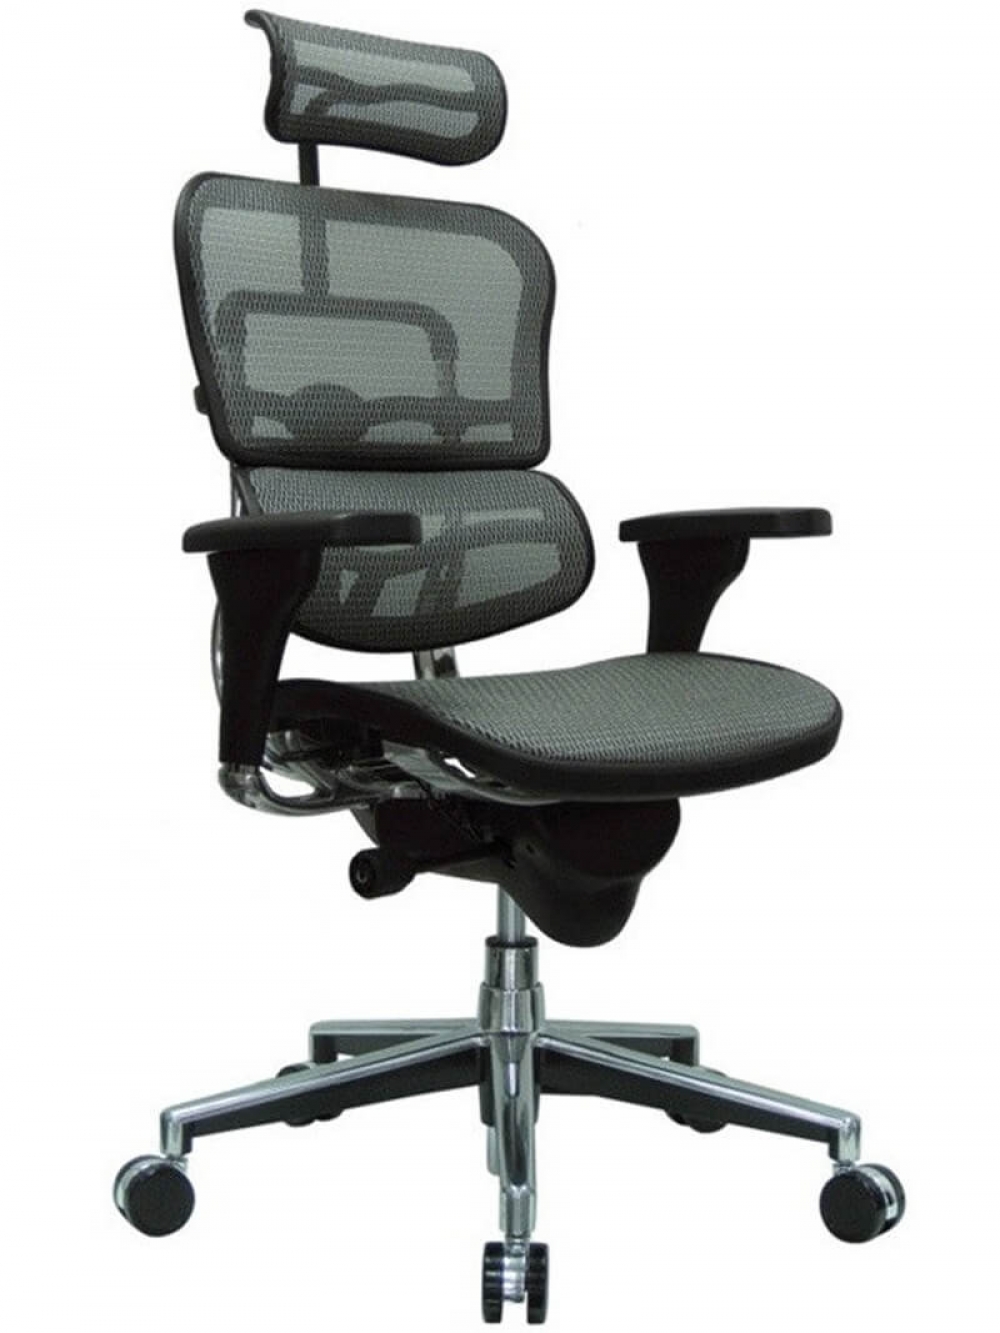 Executive chairs and conference chairs cub me7erg w09 53 eur